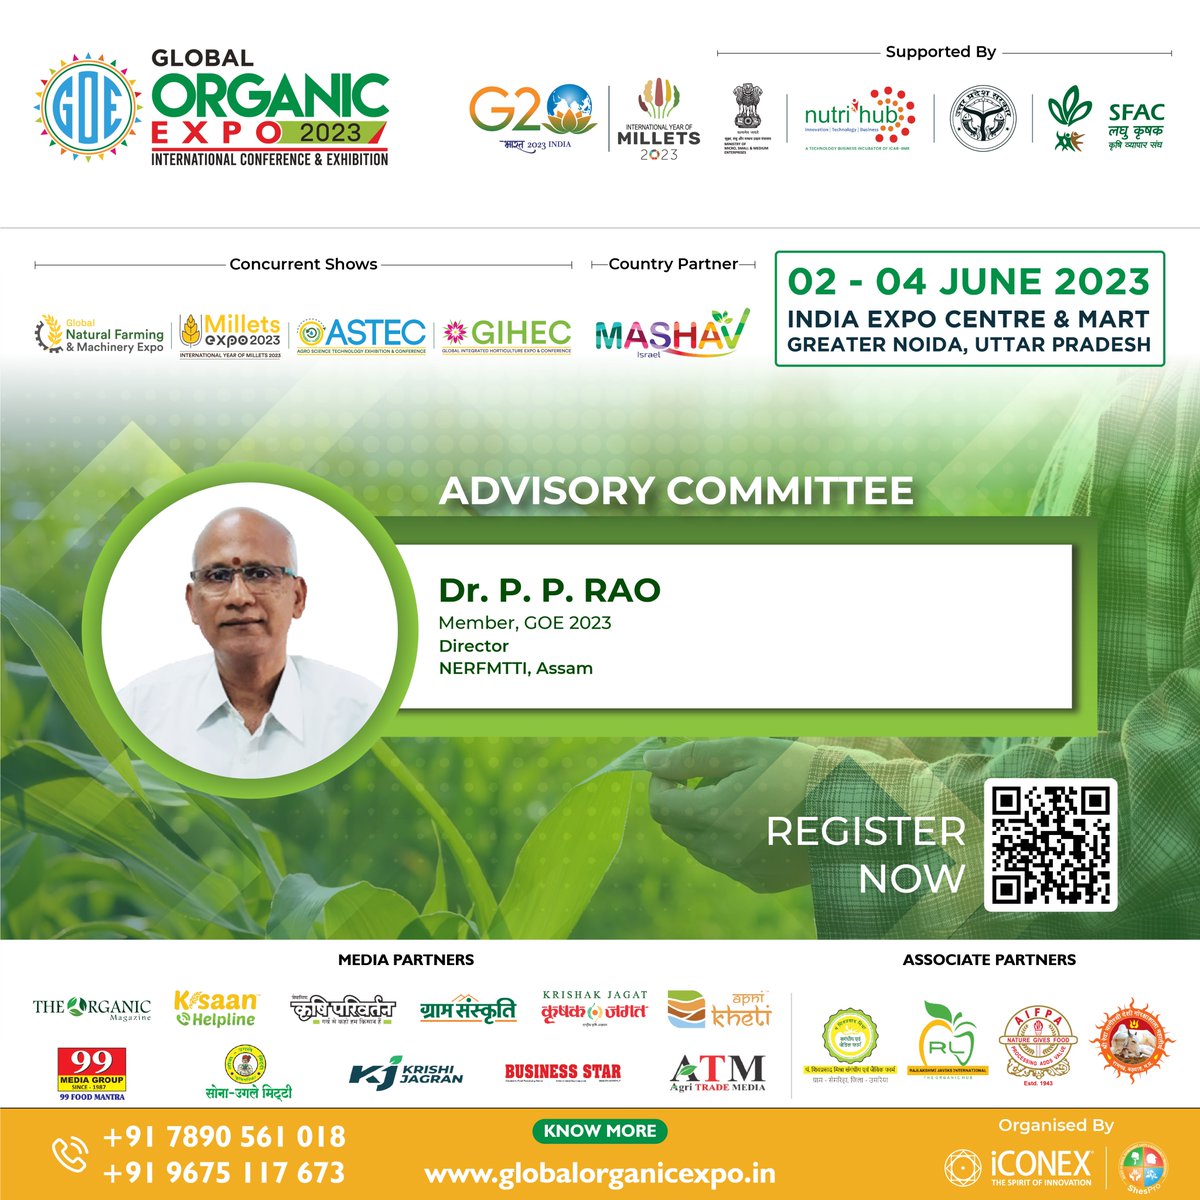 Global Organic Expo 2023 Welcomes Dr. P.P Rao, Director at NERFMTTI, Assam as an Advisory Committee Member of #GOE2023

Get More Information at globalorganicexpo.in

#goe2023 #organicfarming #Millets #millet #naturalfarming #organicfarming #organicproducts #AdvisoryCommittee